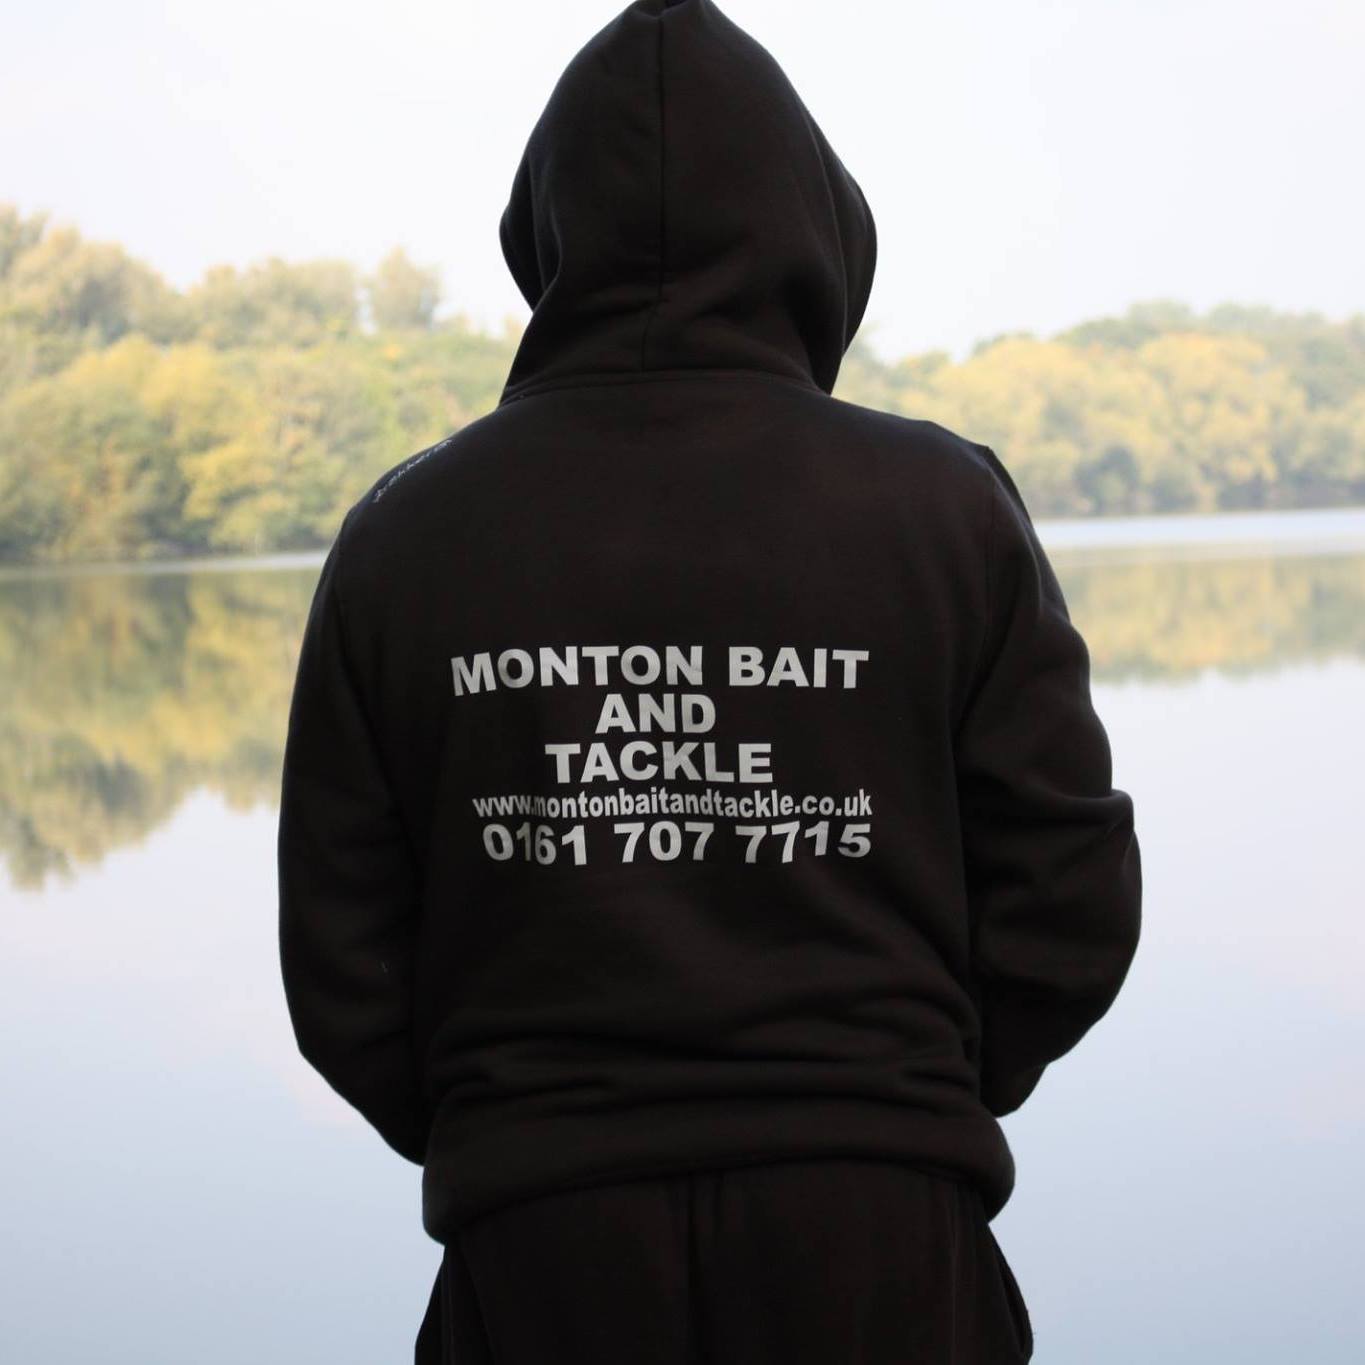 Monton Bait and Tackle